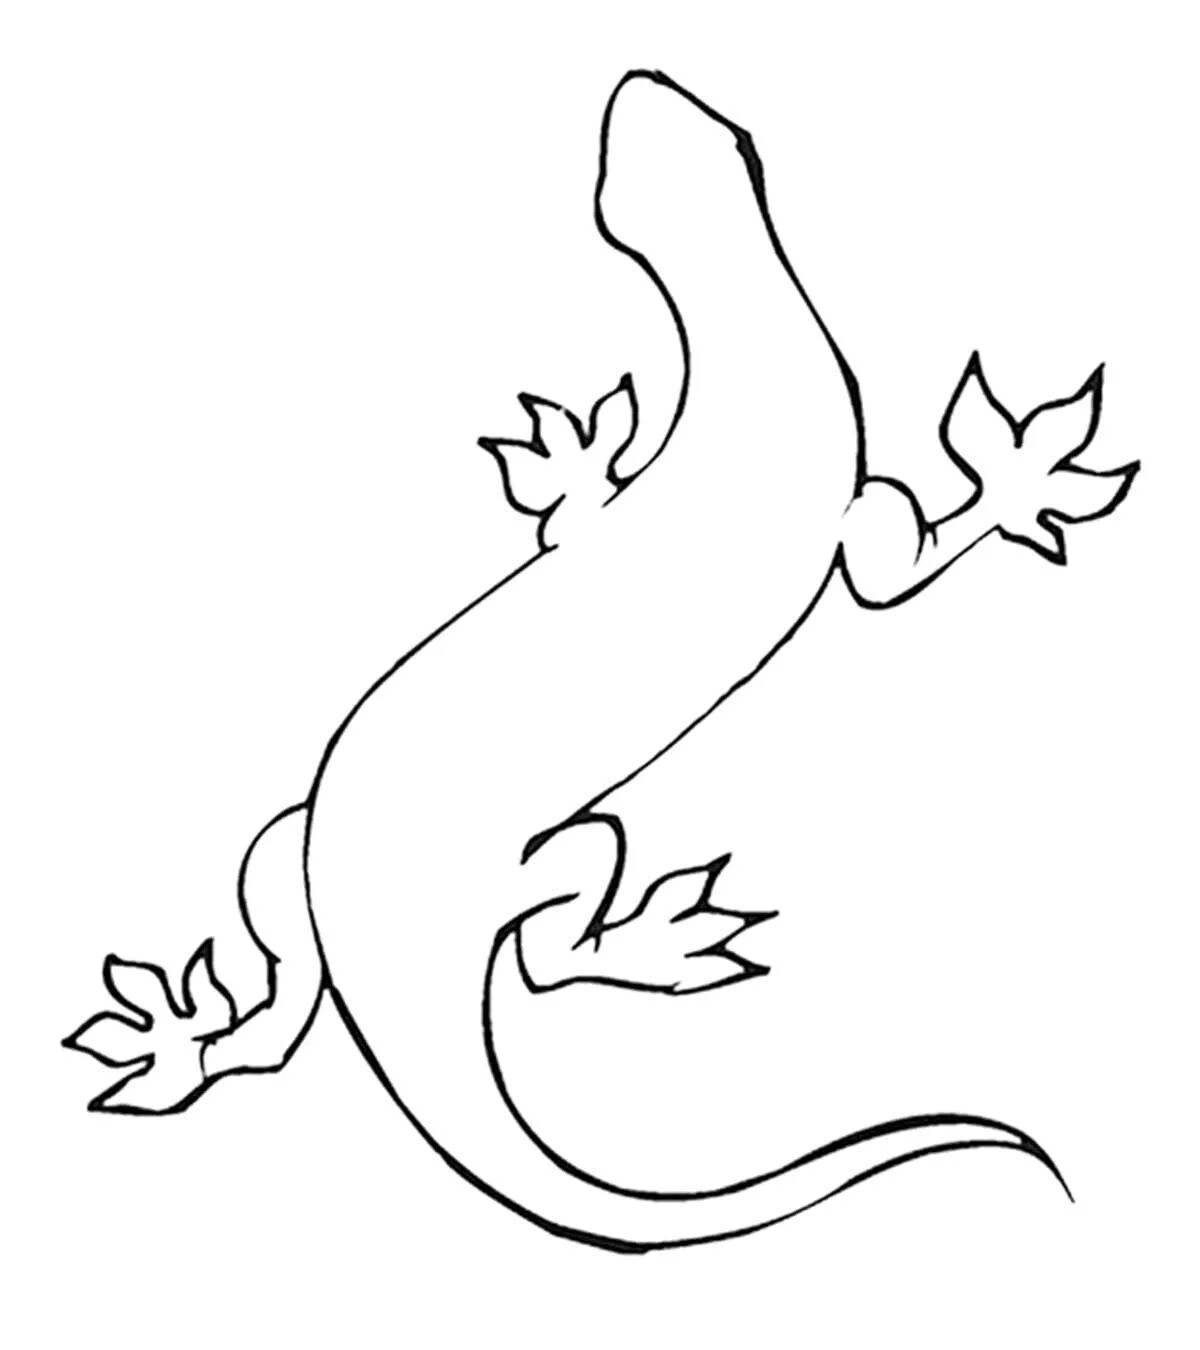 Playful lizard coloring book for kids